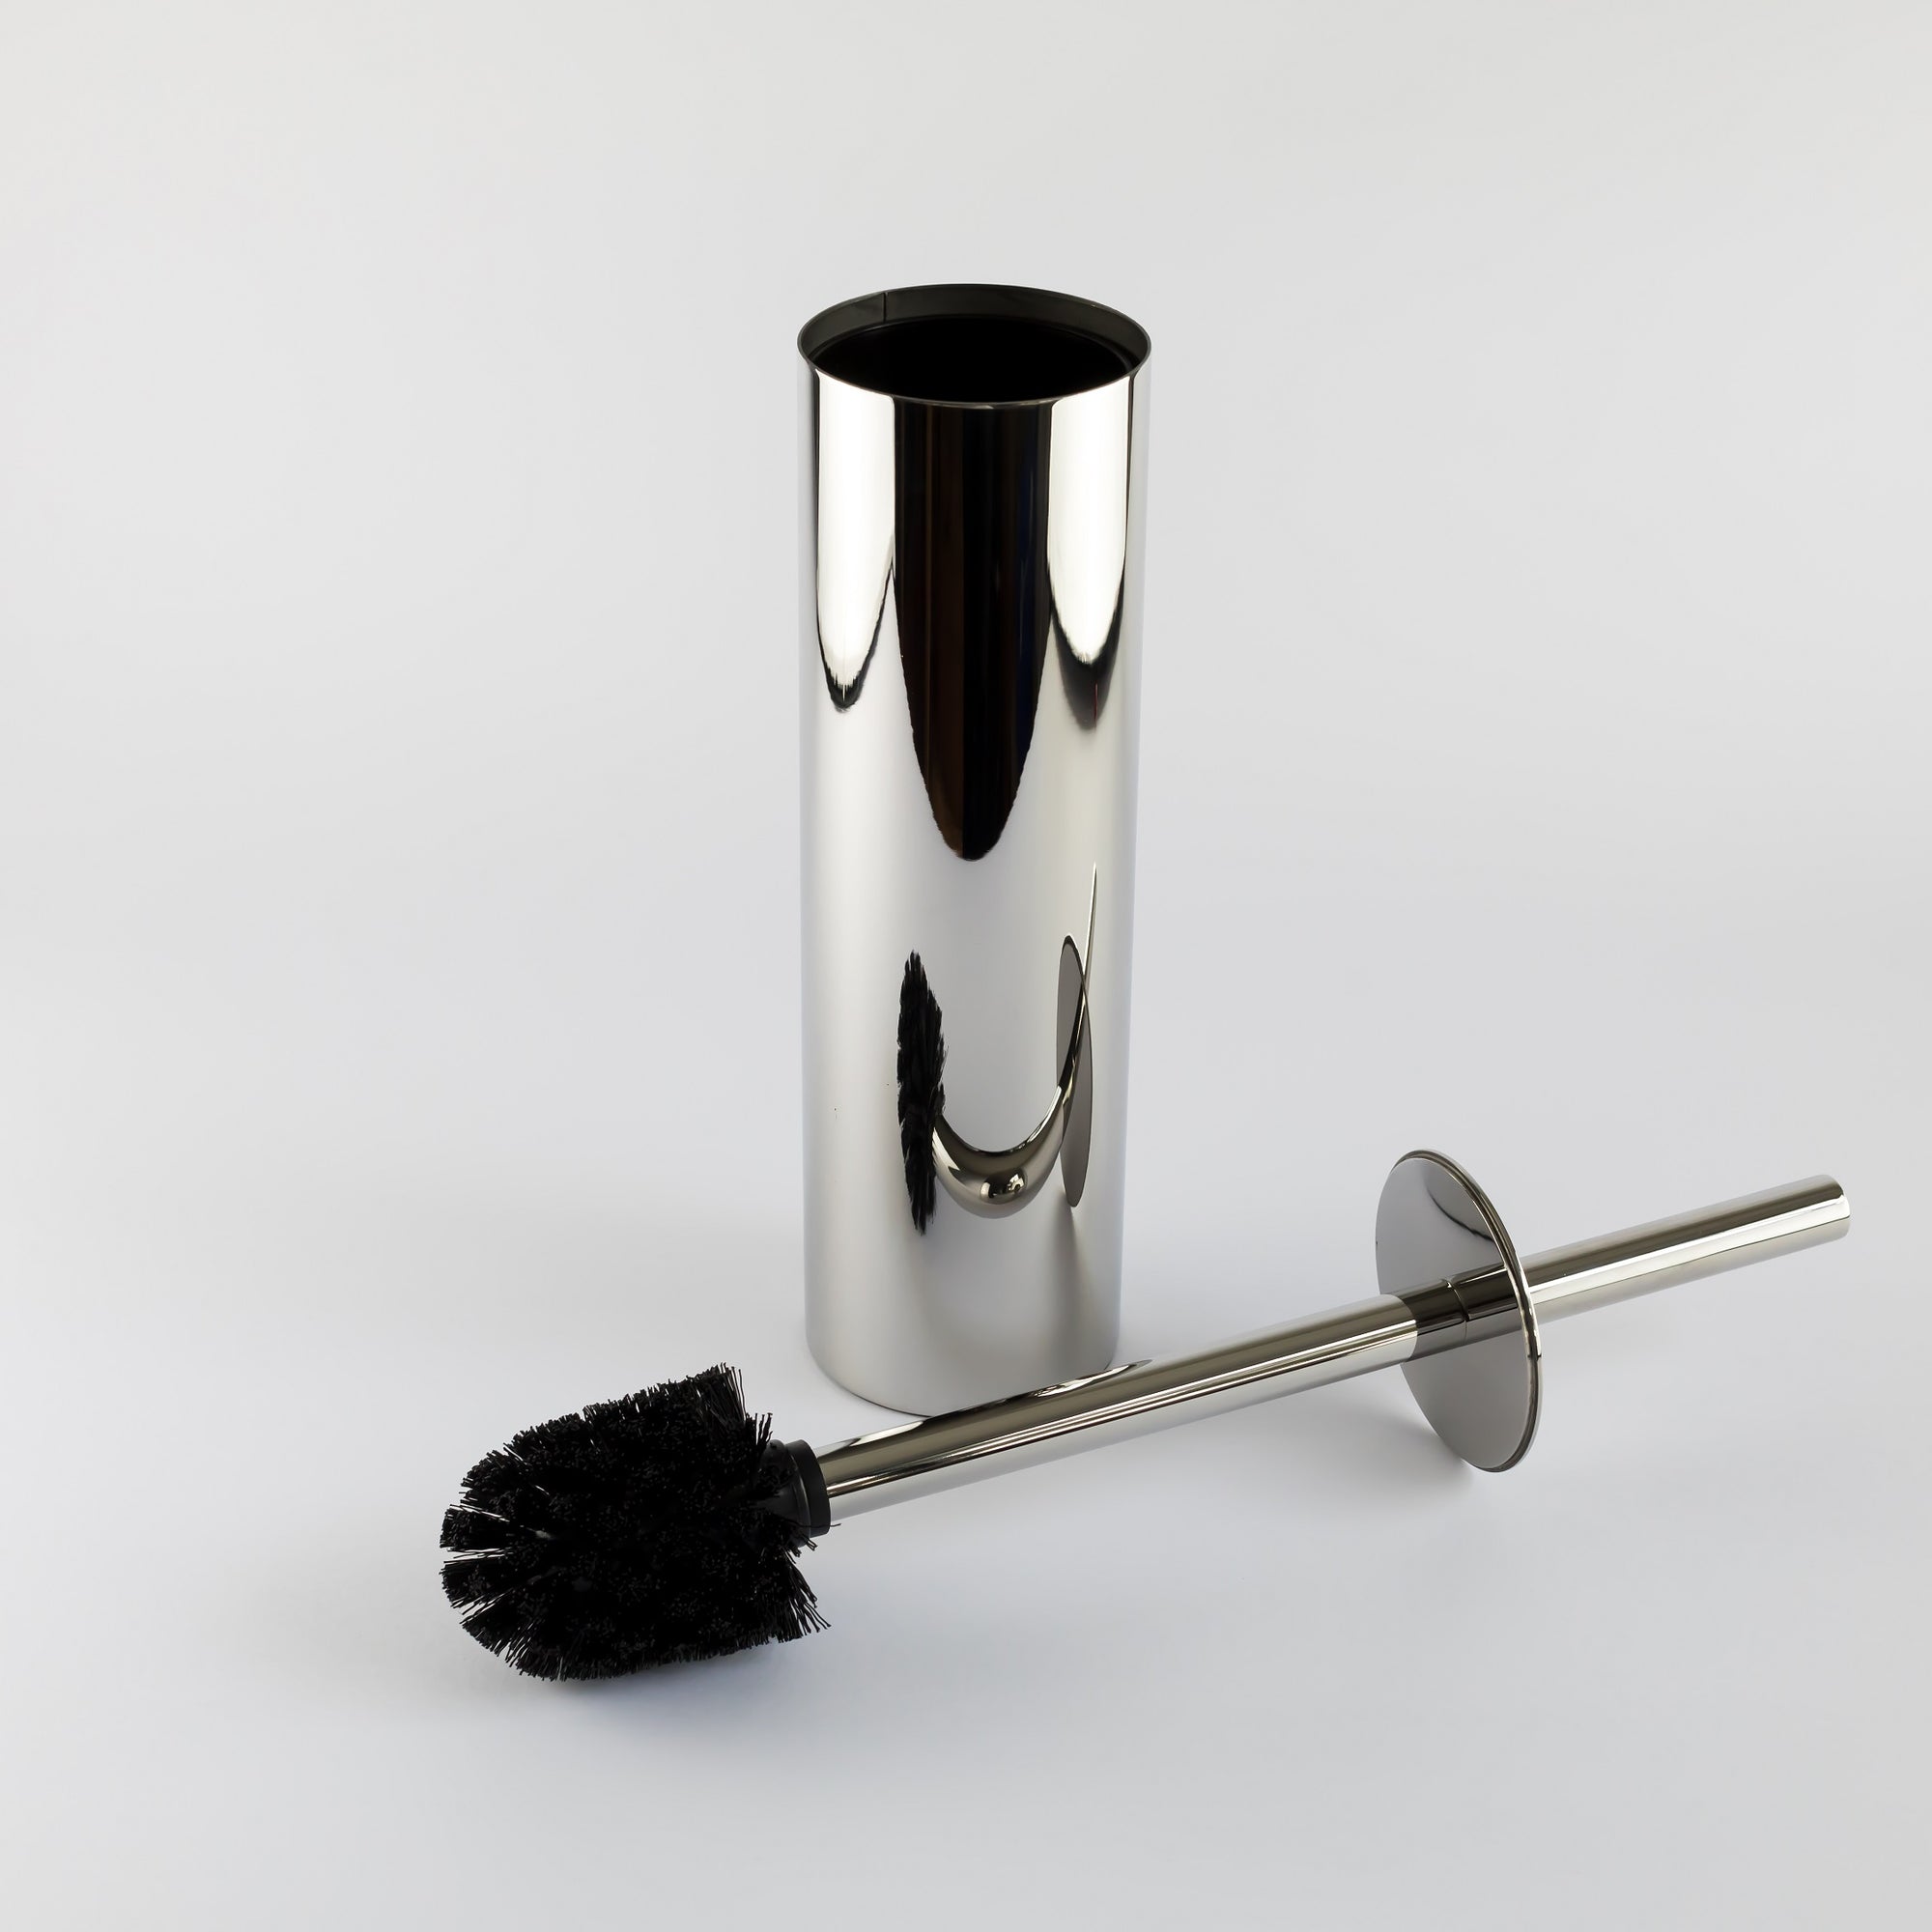 Which Is Better For A Toilet Brush Holder: Chrome Or Nickel Metal